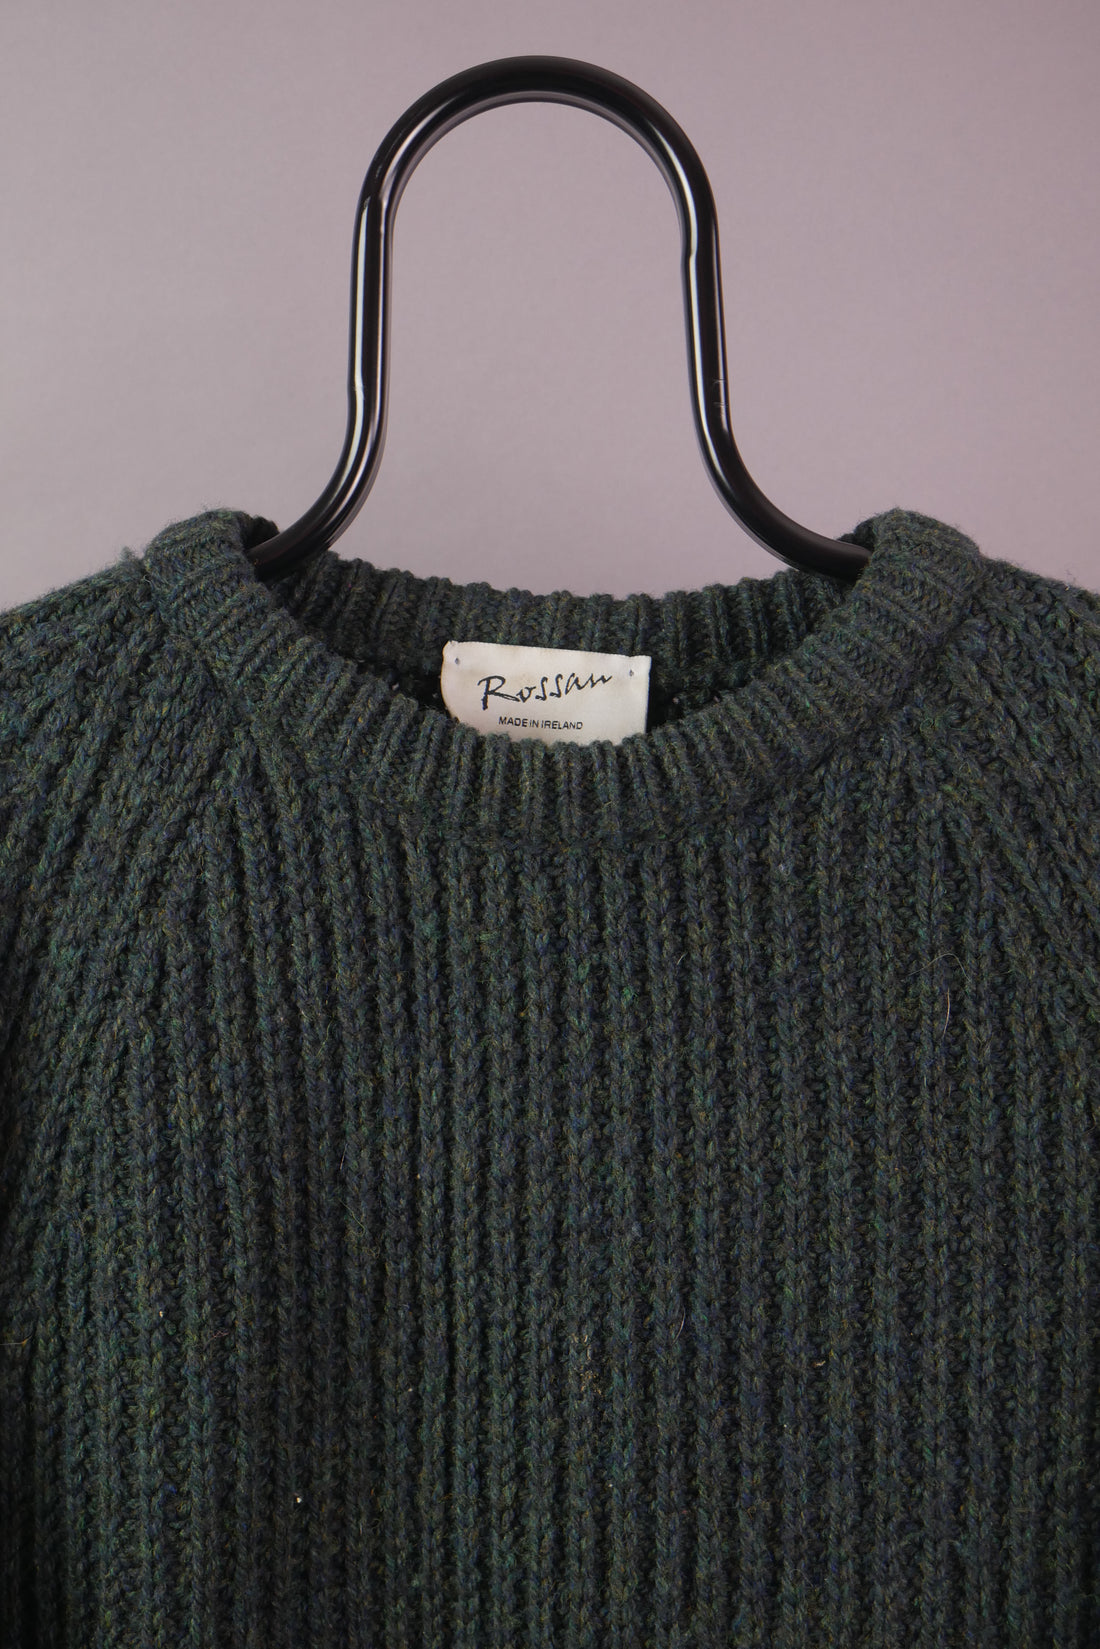 The Vintage 100% Wool Knitted Jumper (XL)